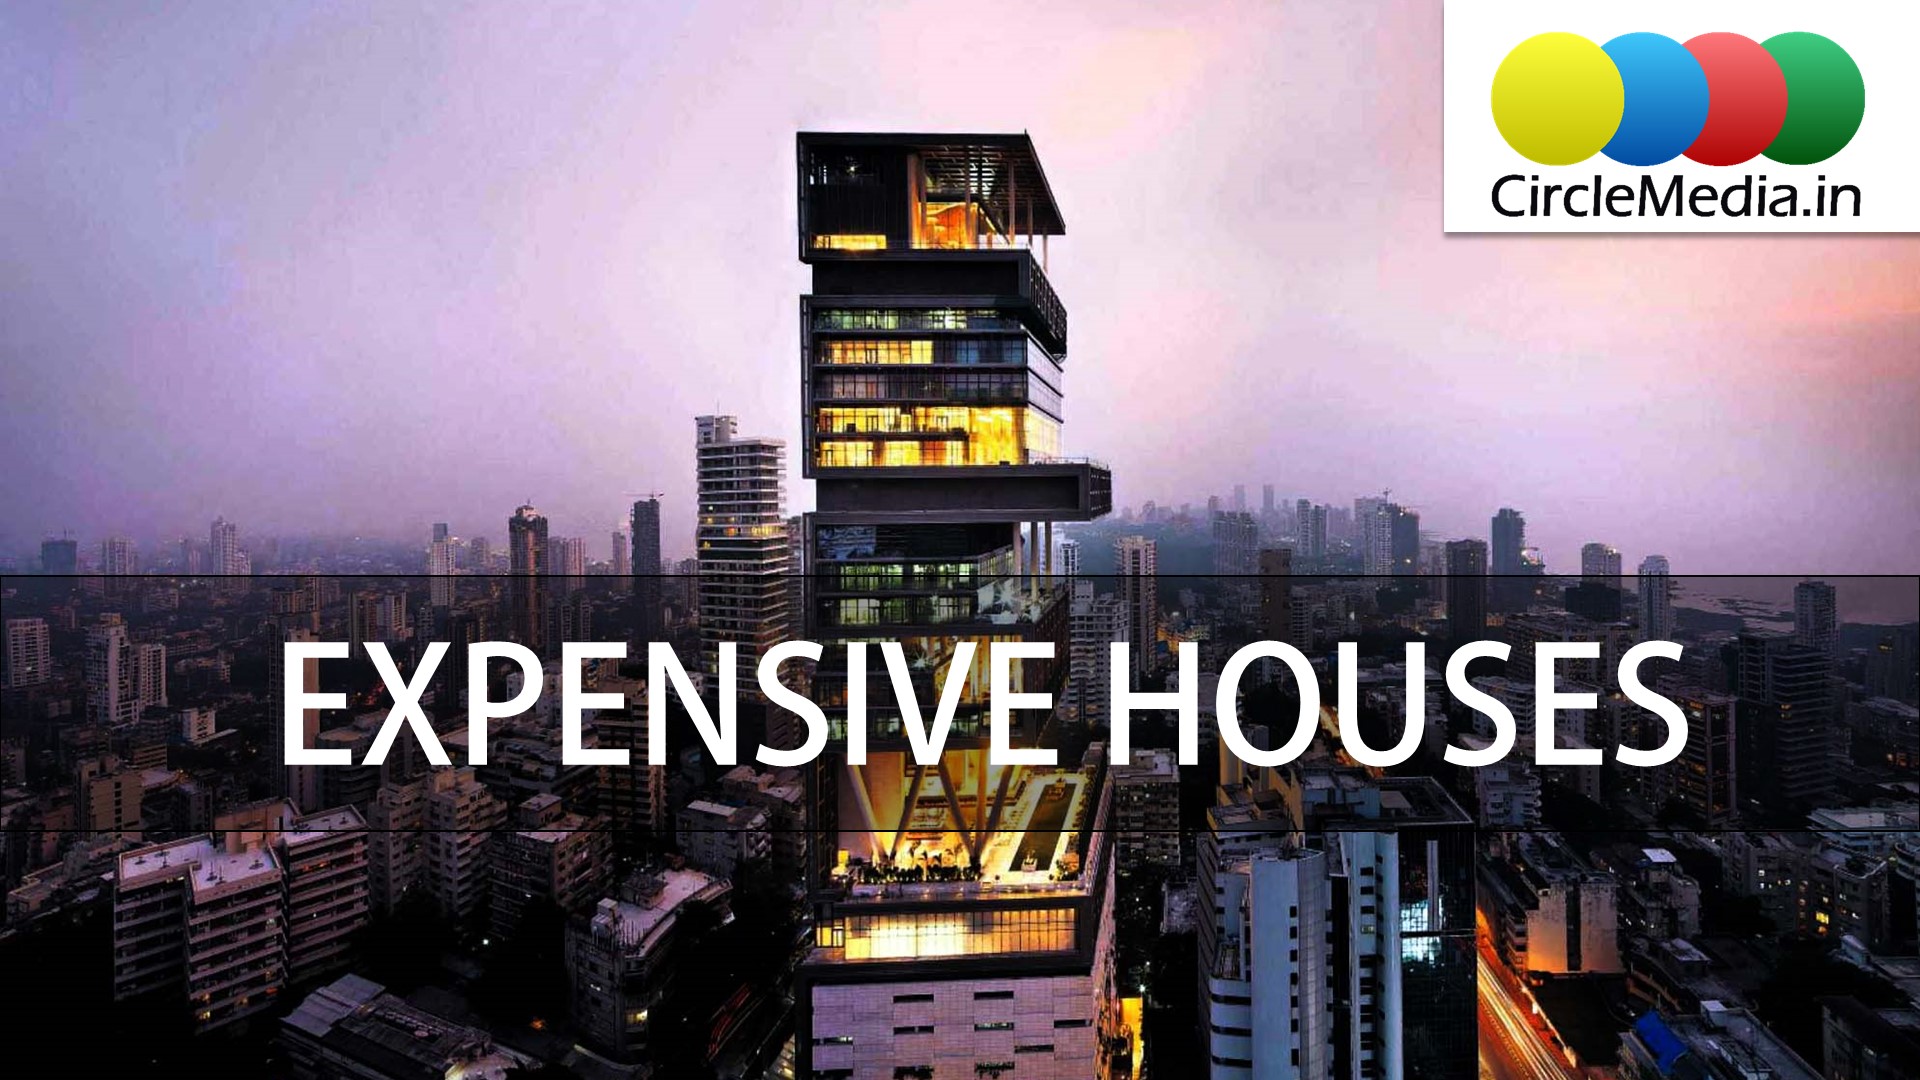 The 15 Most Expensive Houses in the World | Rich People's Houses in the World | CircleMedia.in